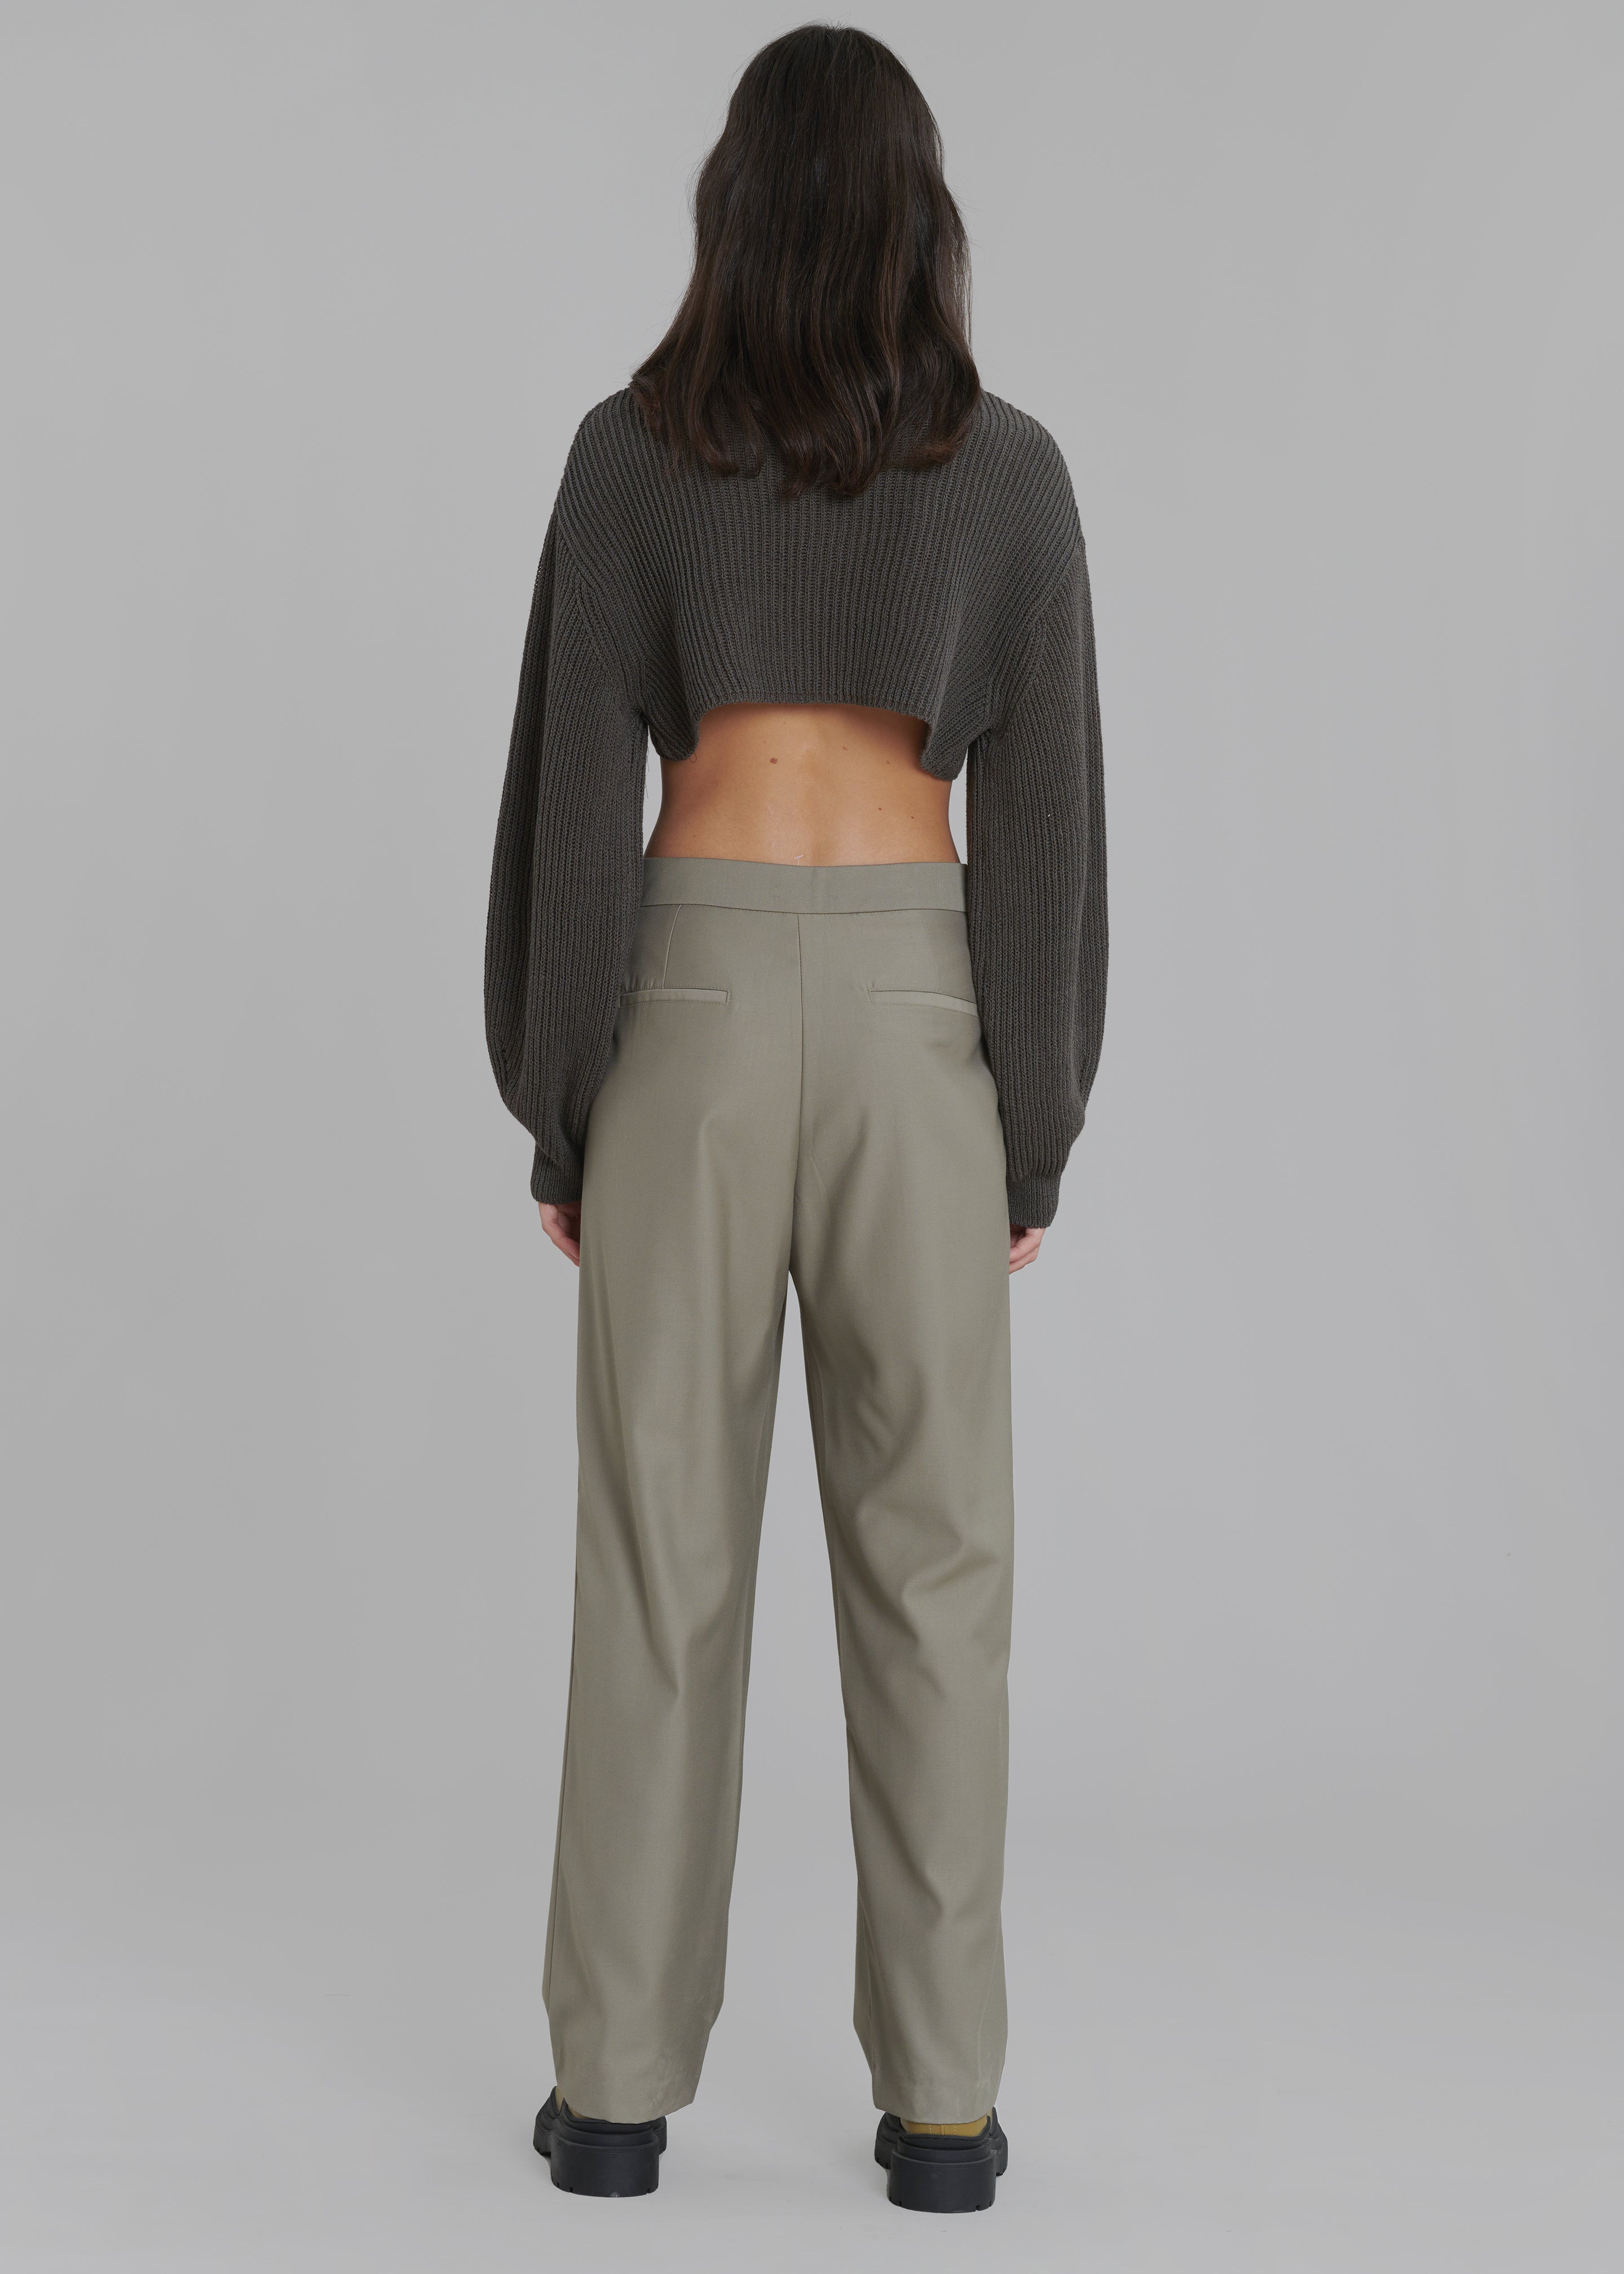 Louise Cut Out Trousers - Olive - 7